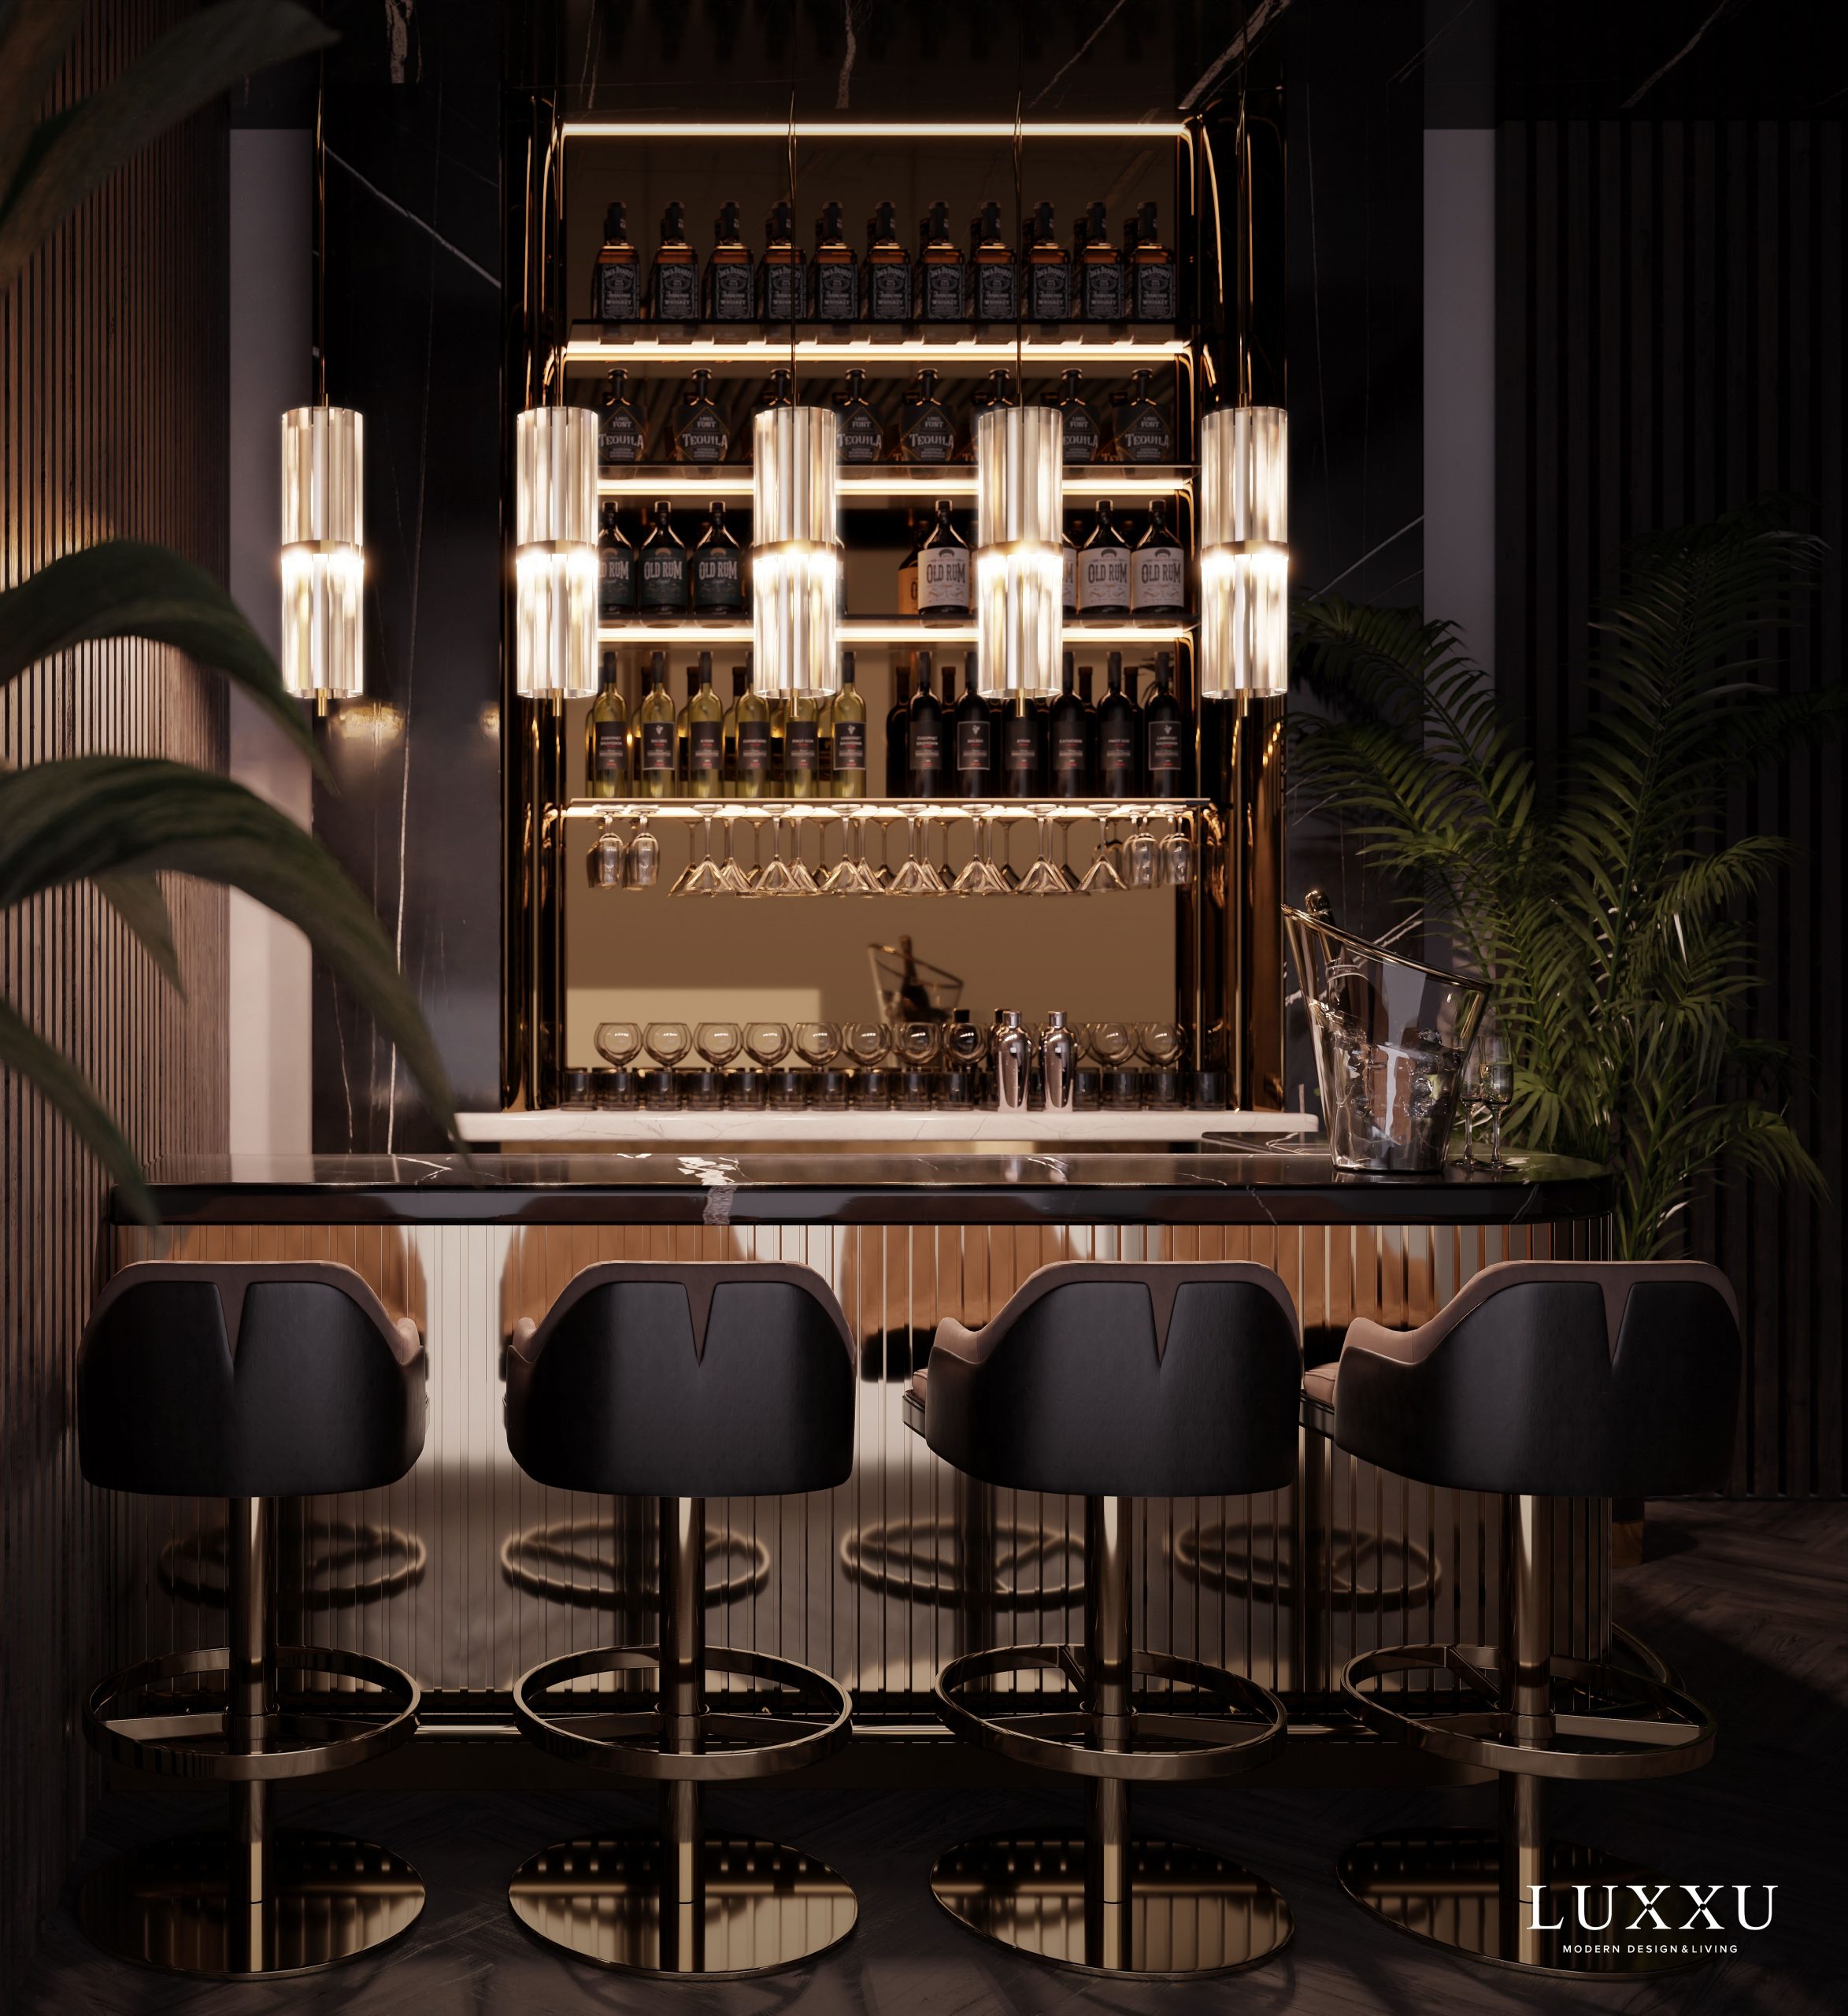 Upgrade Your Bar Area With These Amazing Lighting Fixtures